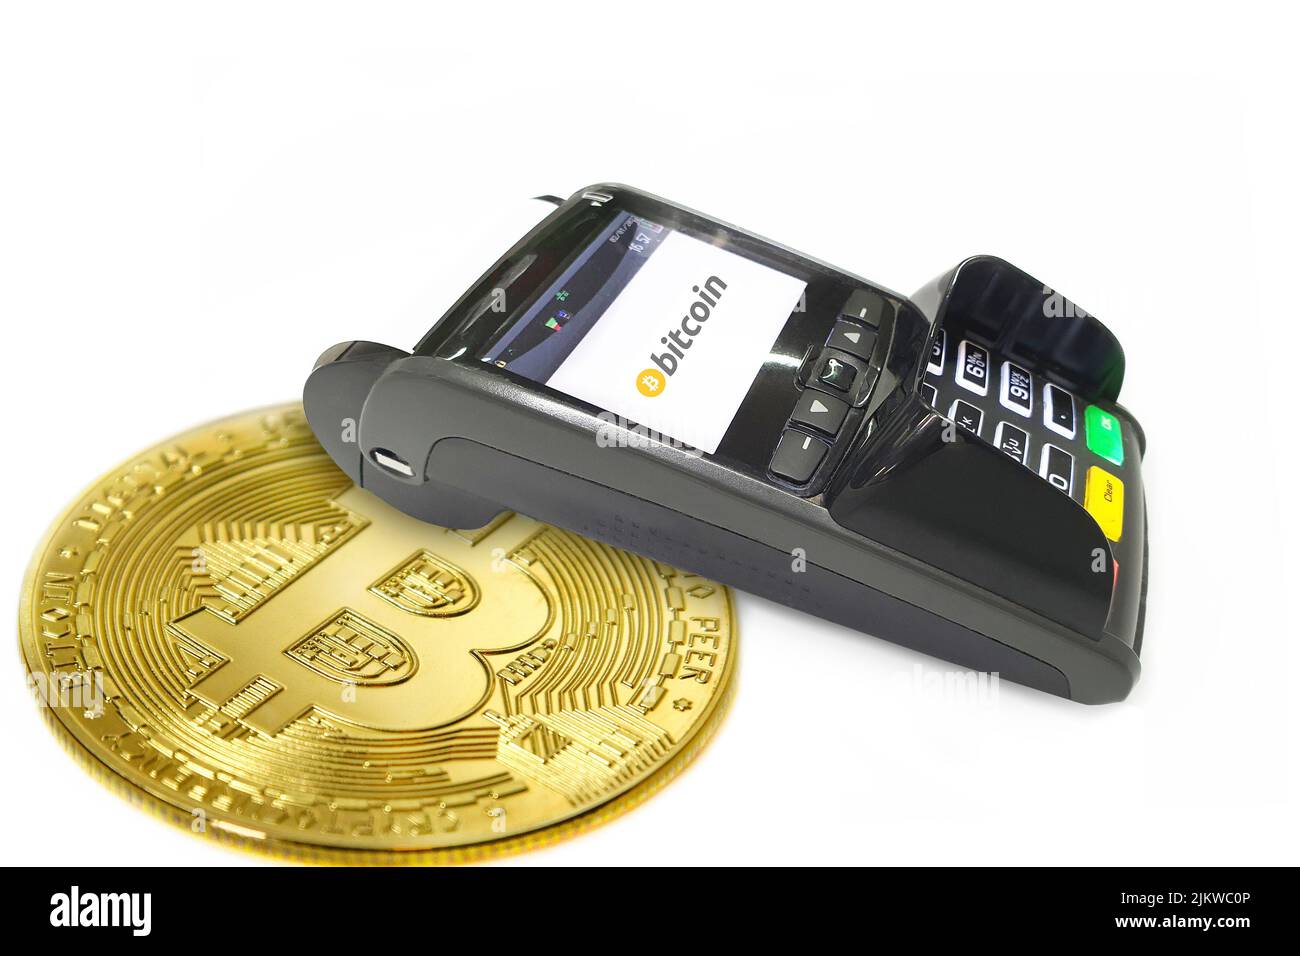 A POS terminal for bitcoin payments isolated on a white background Stock Photo